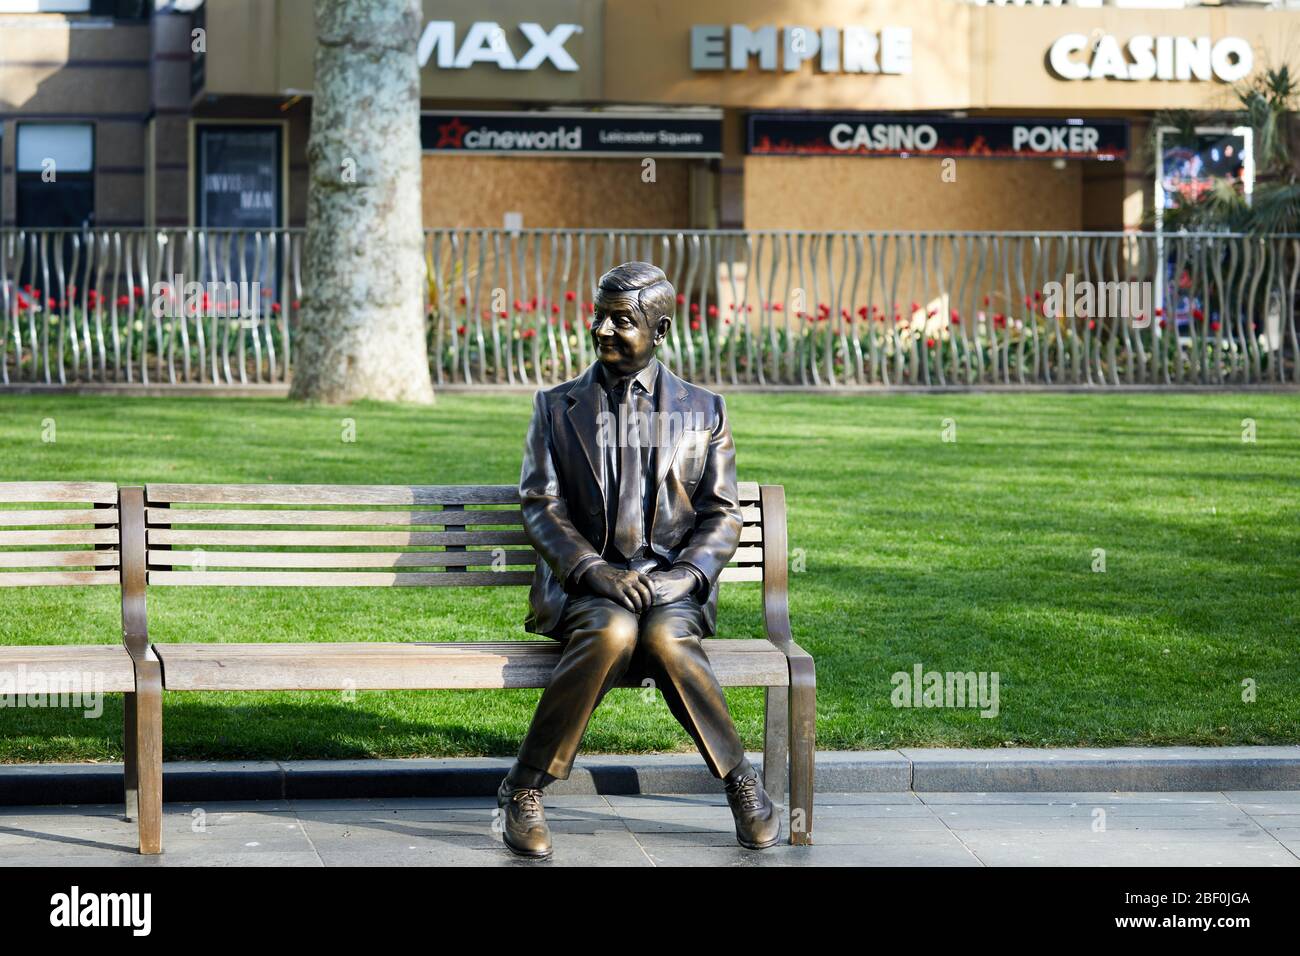 London, U.K. - 16 Apr 2020: A statue of Mr Bean in front of a boarded-up Empire Leicester Square, closed during the Covid-19 coronavirus pandemic lockdown. Stock Photo